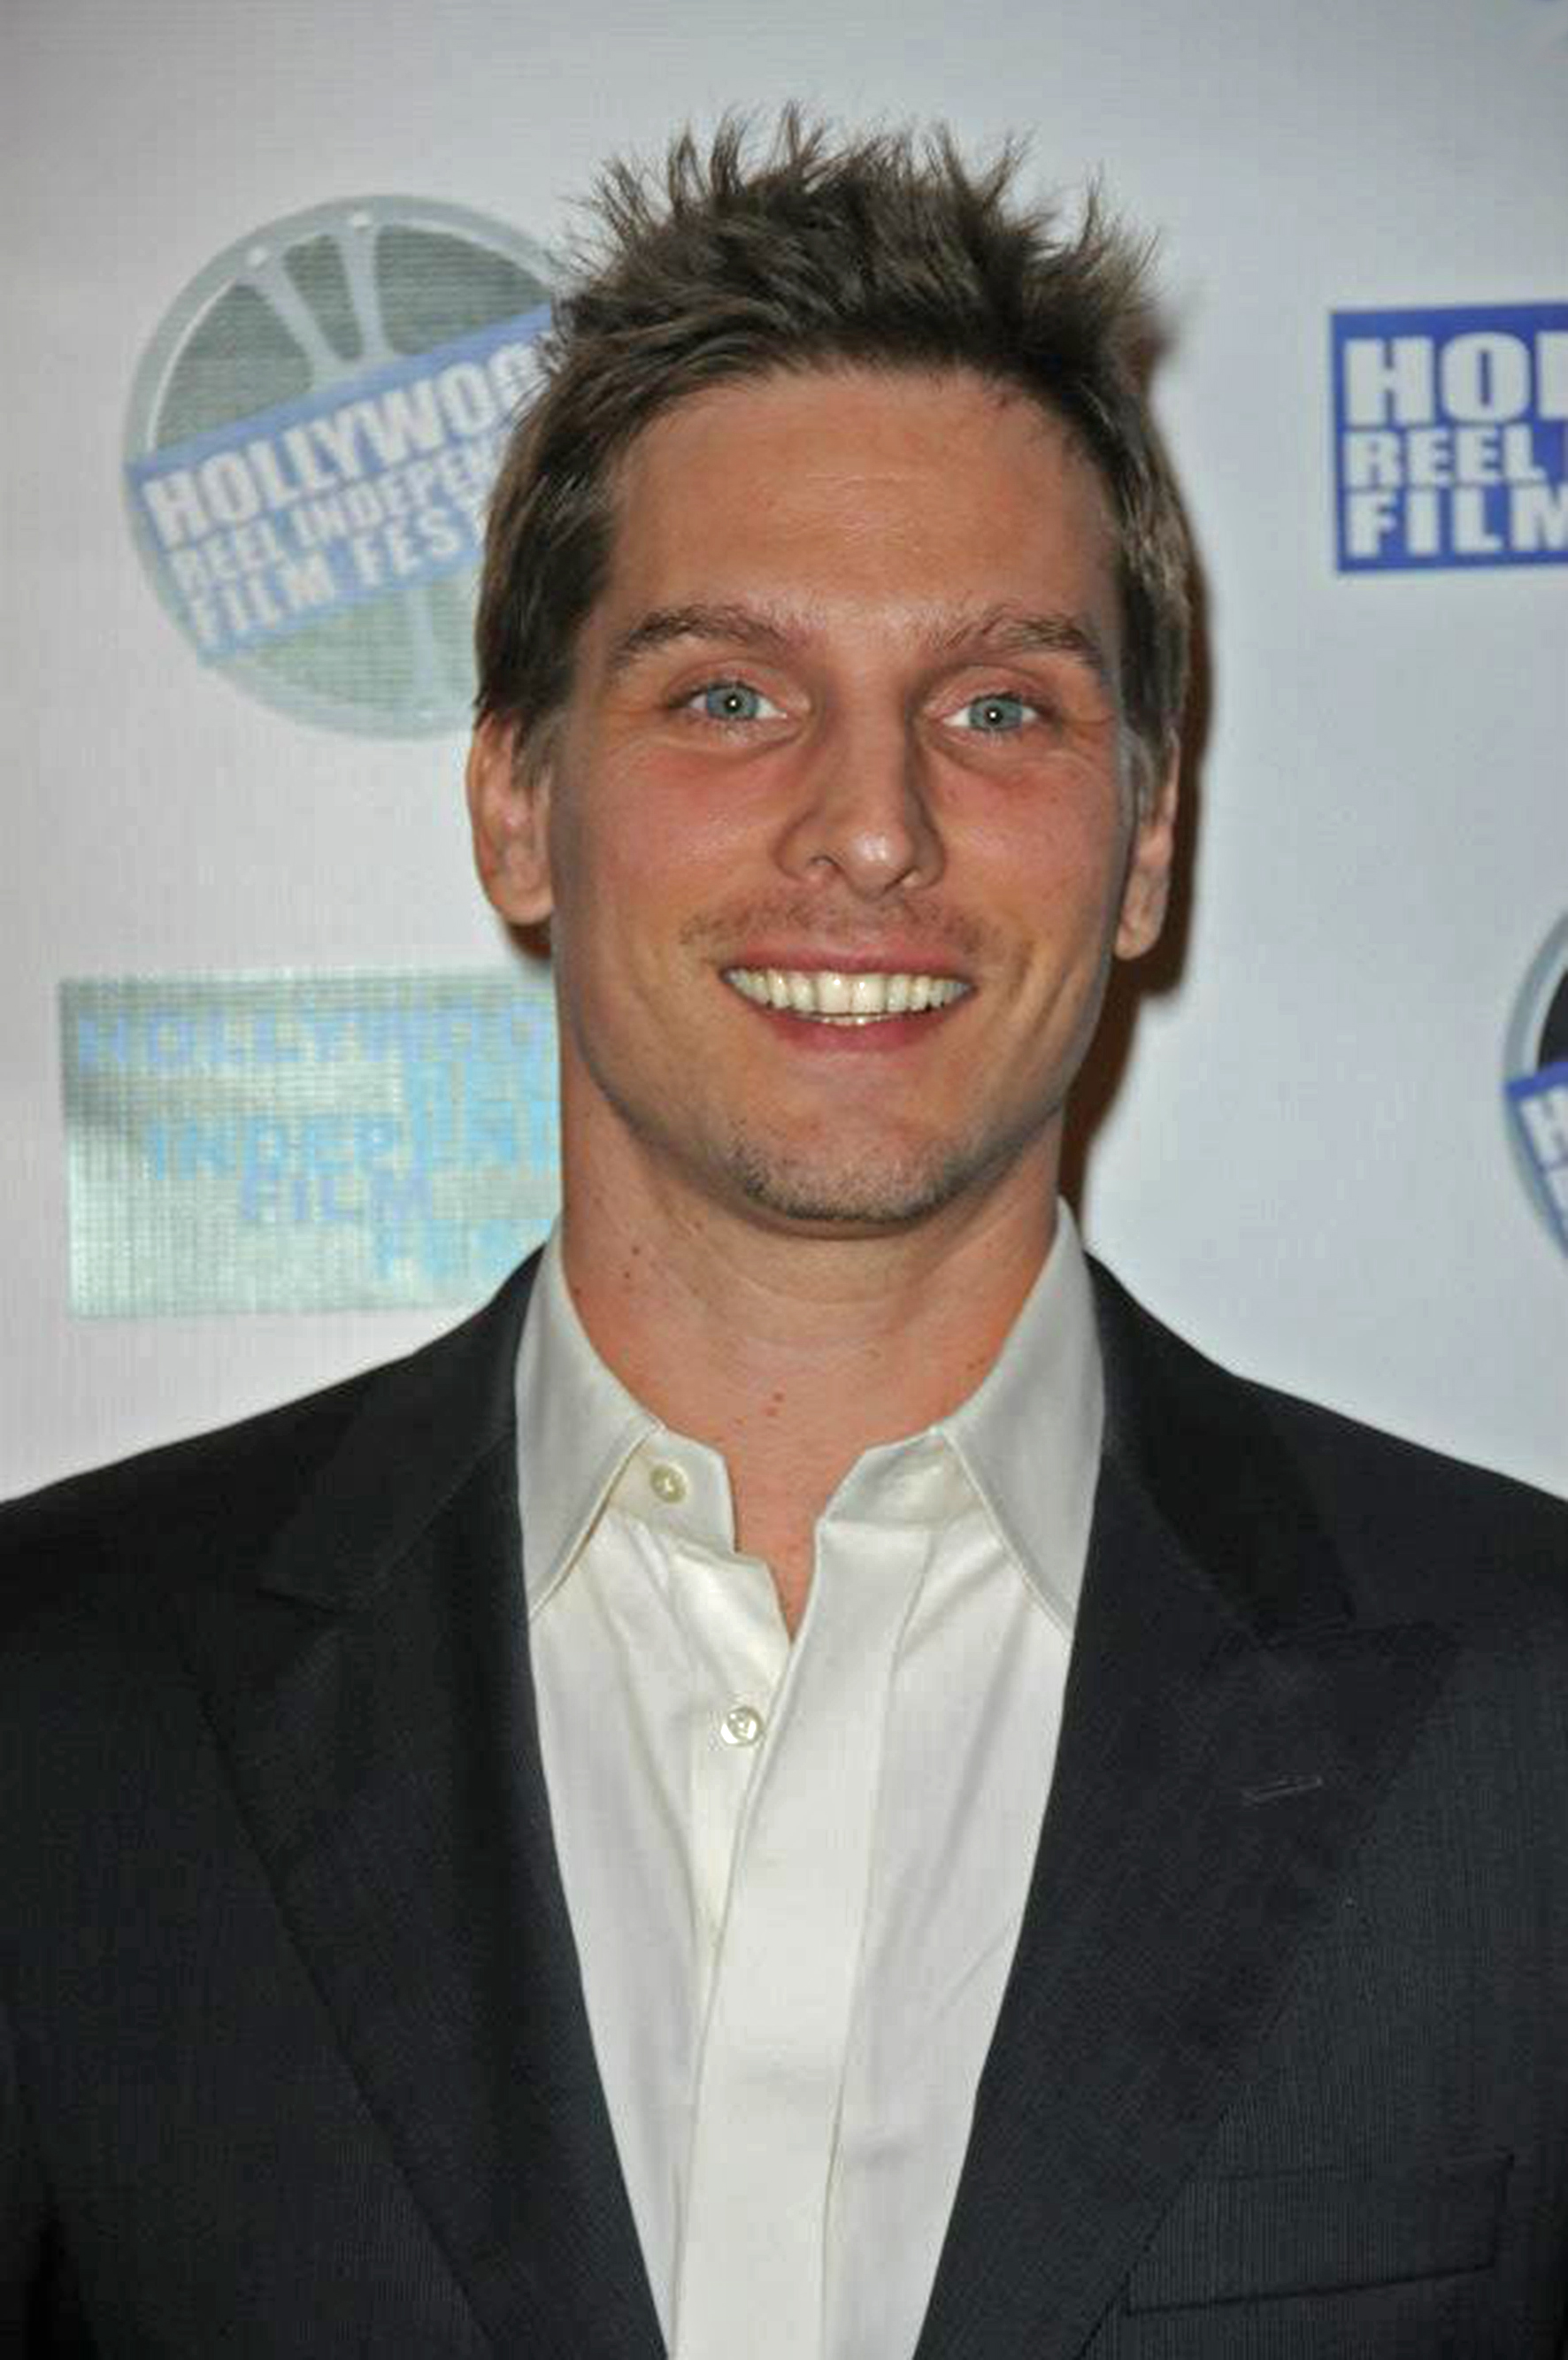 Doug Maguire at the 2012 Hollywood Reel Independent Film Festival